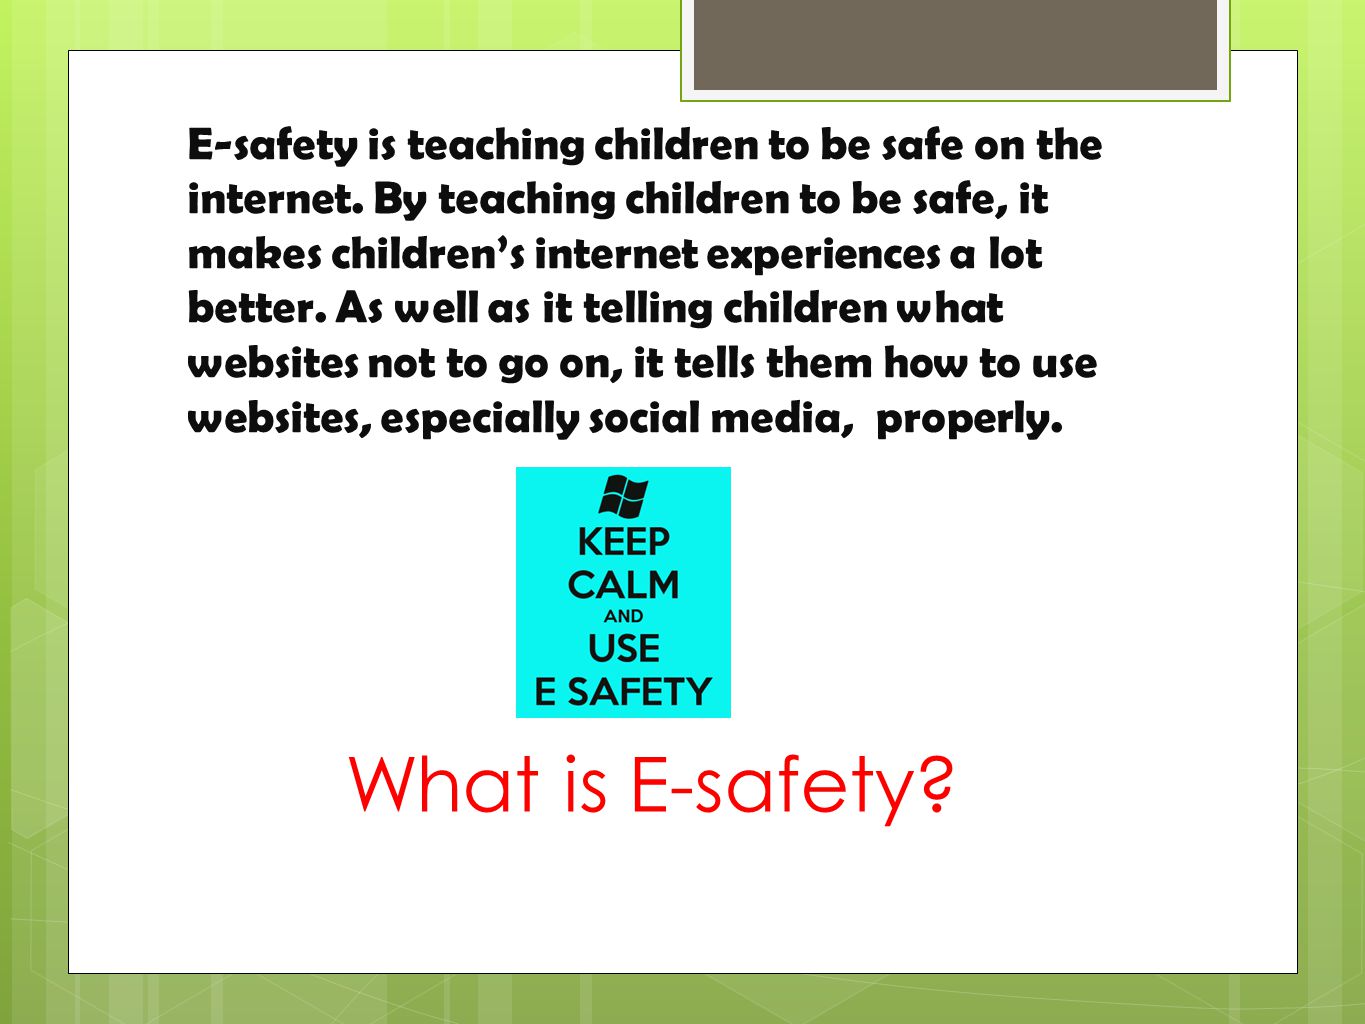 E-safety is teaching children to be safe on the internet